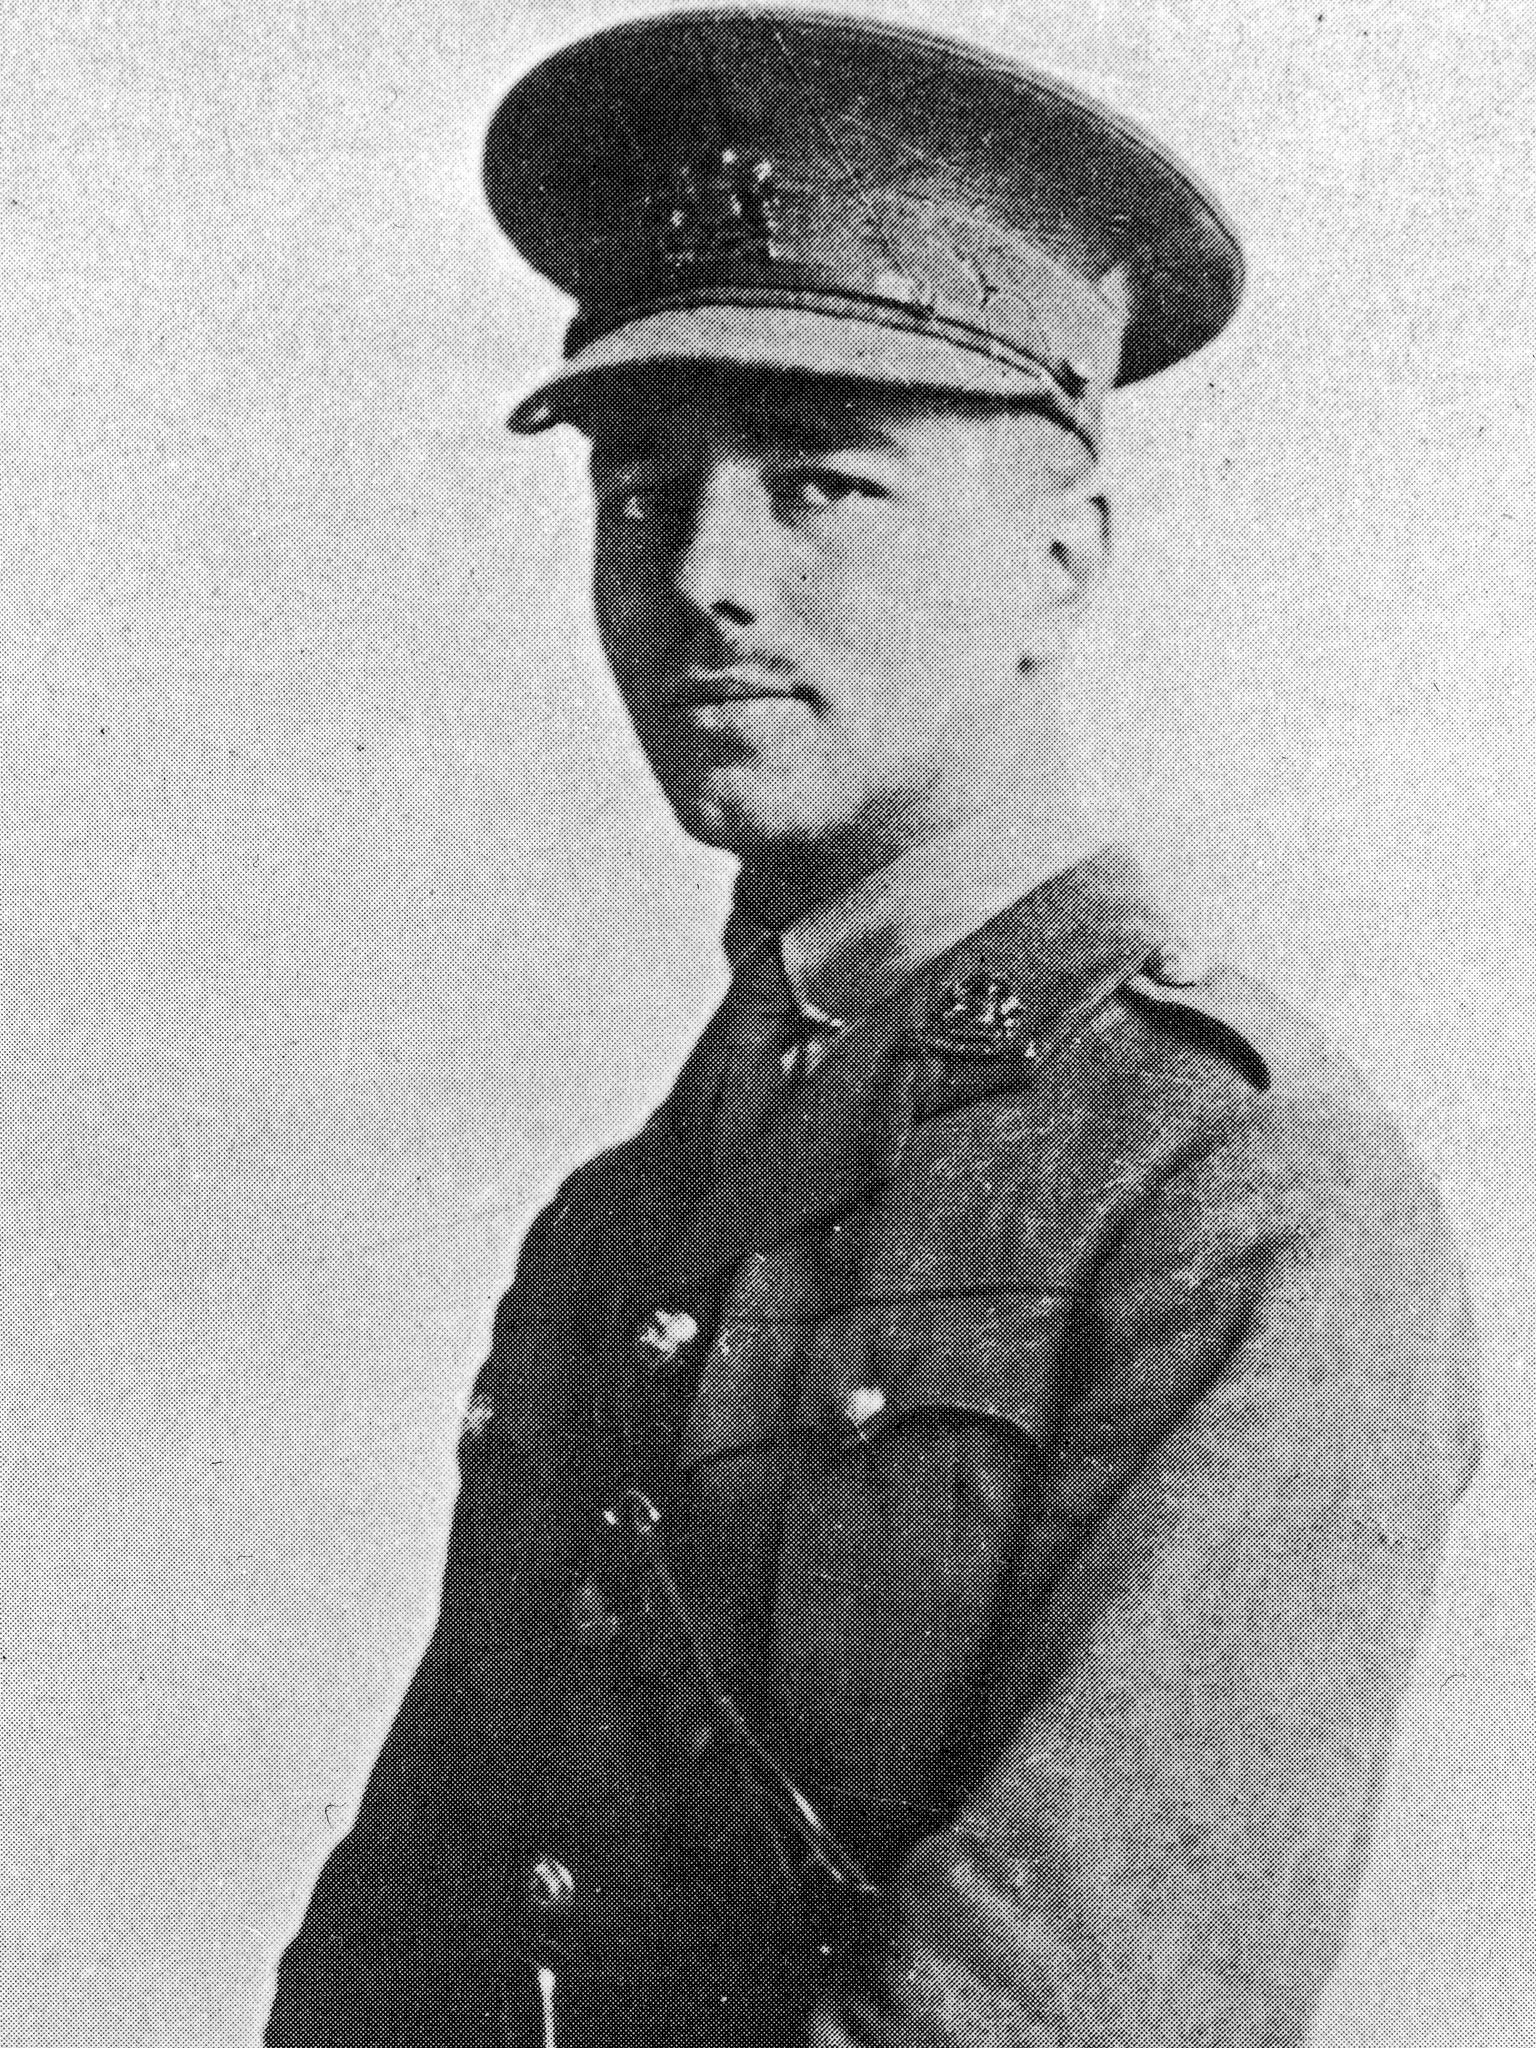 Wilfred Owen in uniform as a 2nd Lieutenant. The poet was teaching in France when the war began